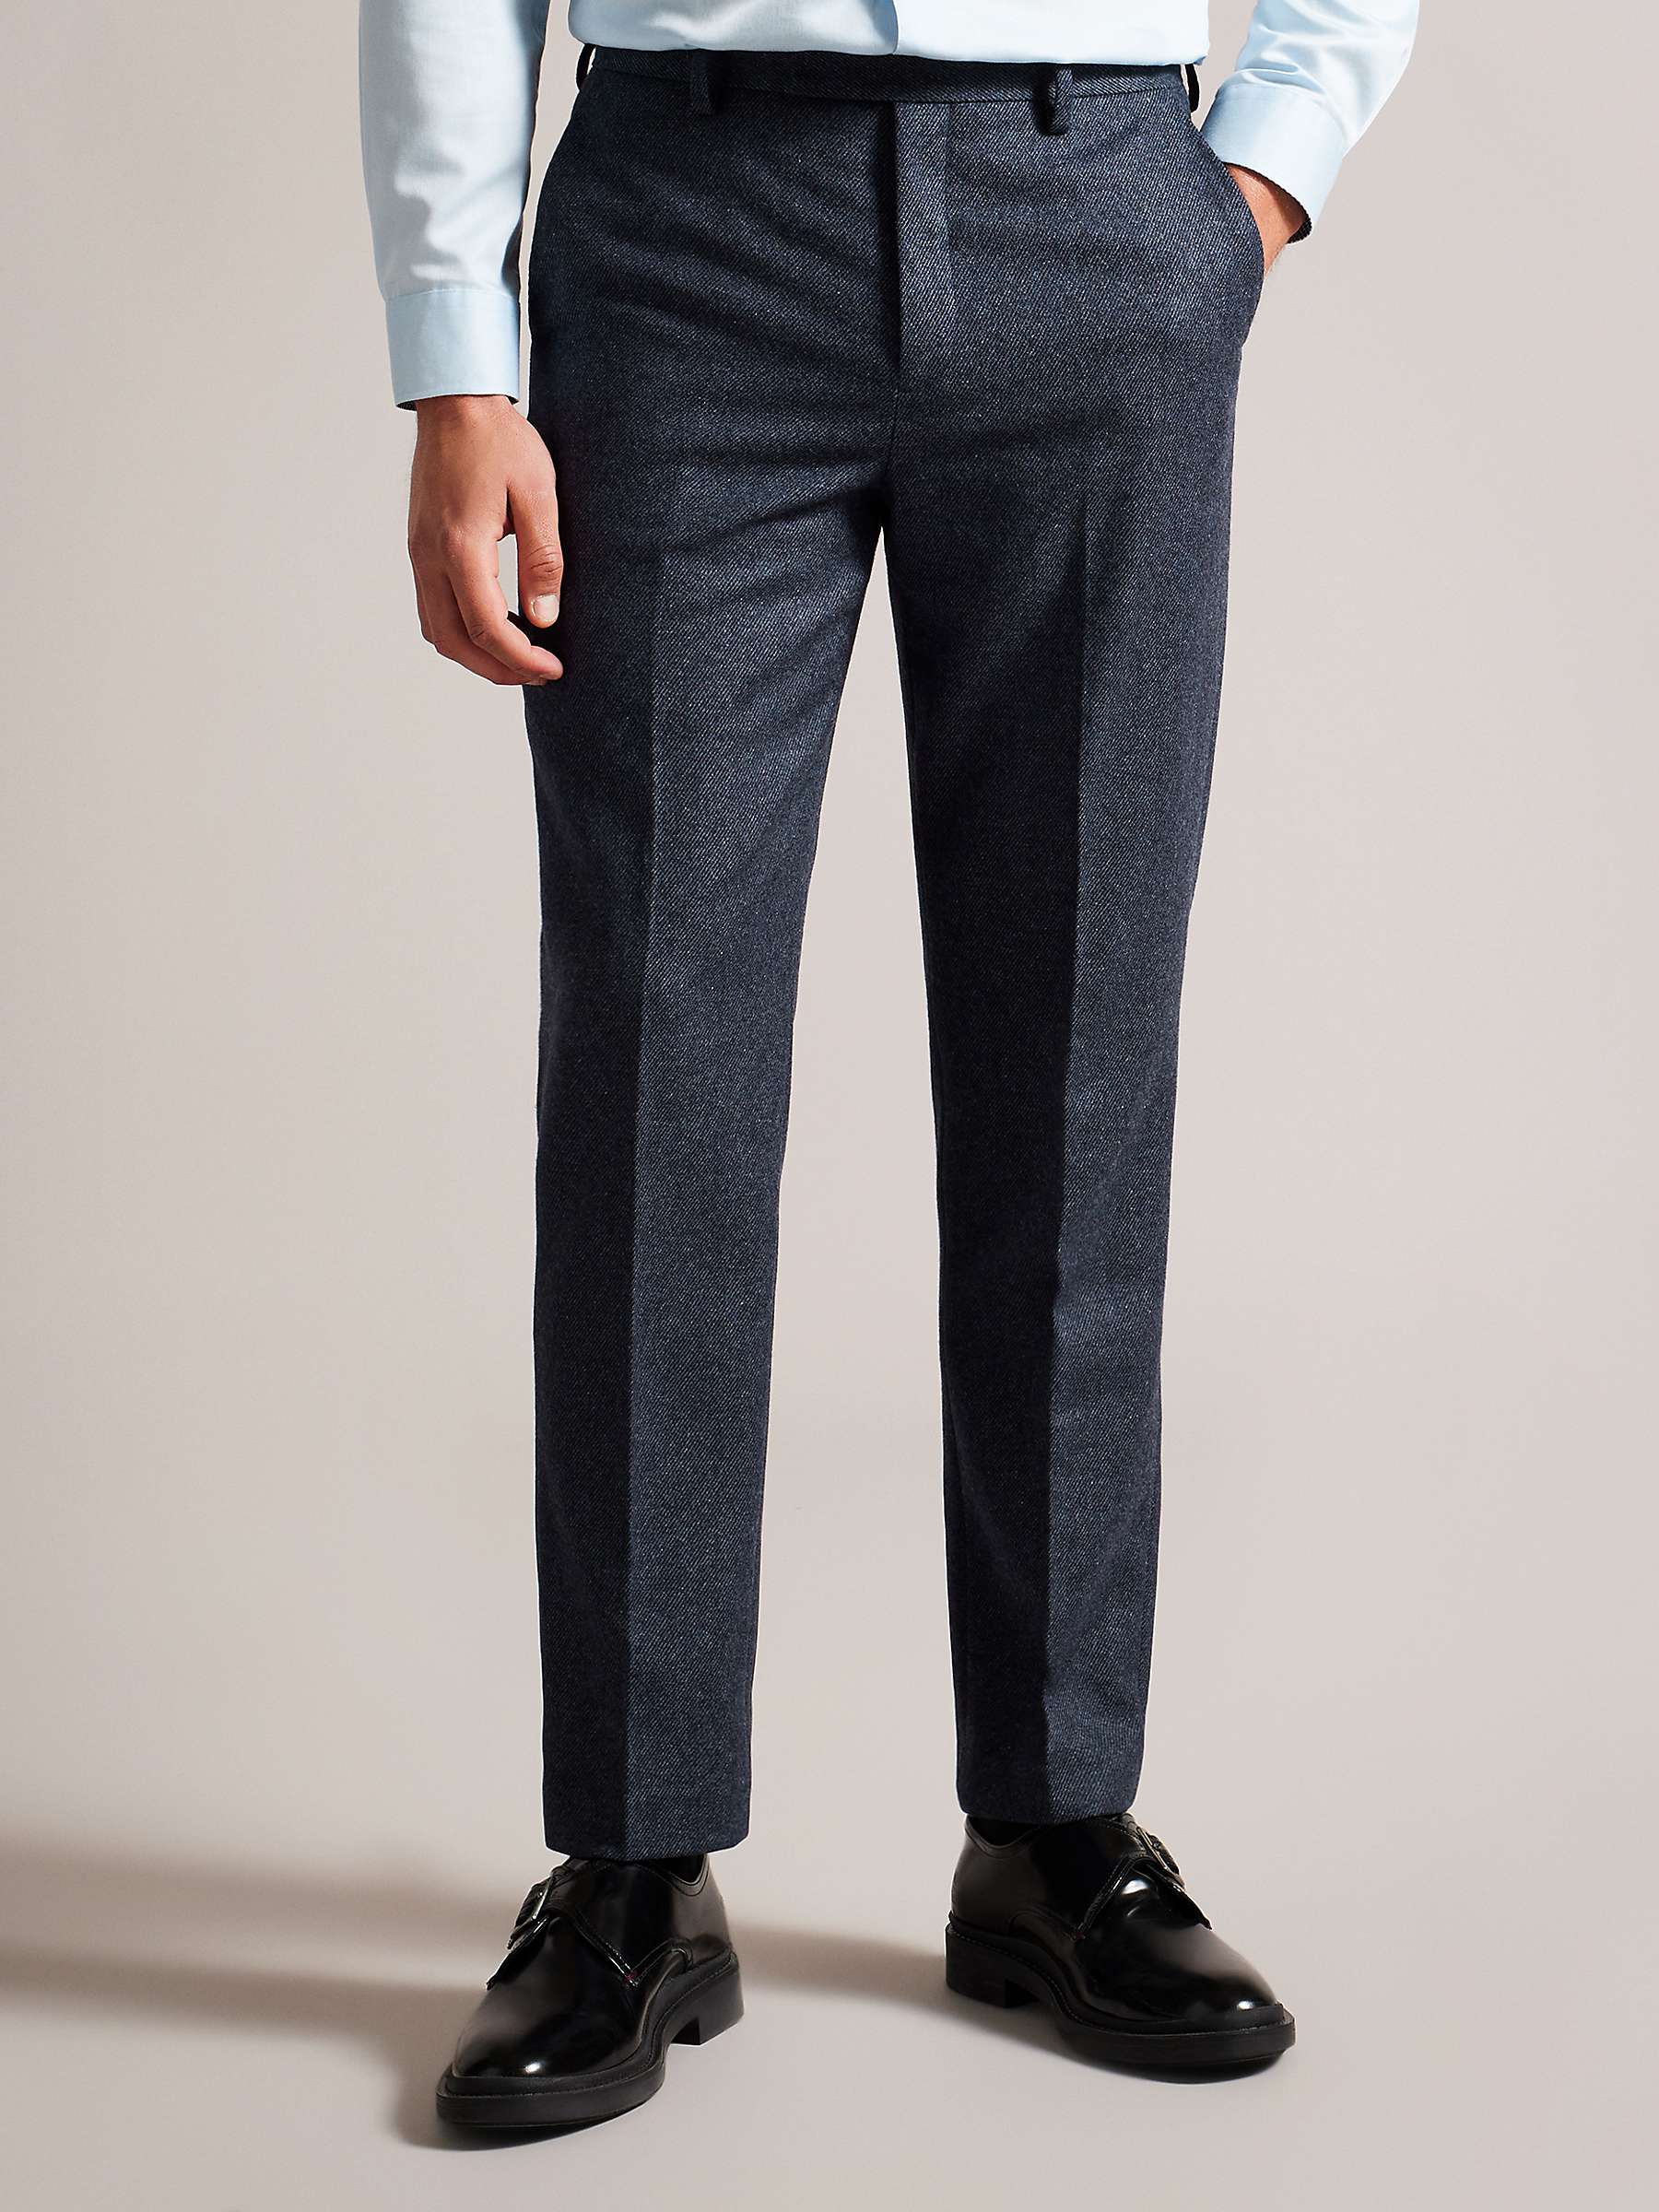 Buy Ted Baker Arthurt Slim Fit Wool Blend Tailored Trousers, Navy Online at johnlewis.com